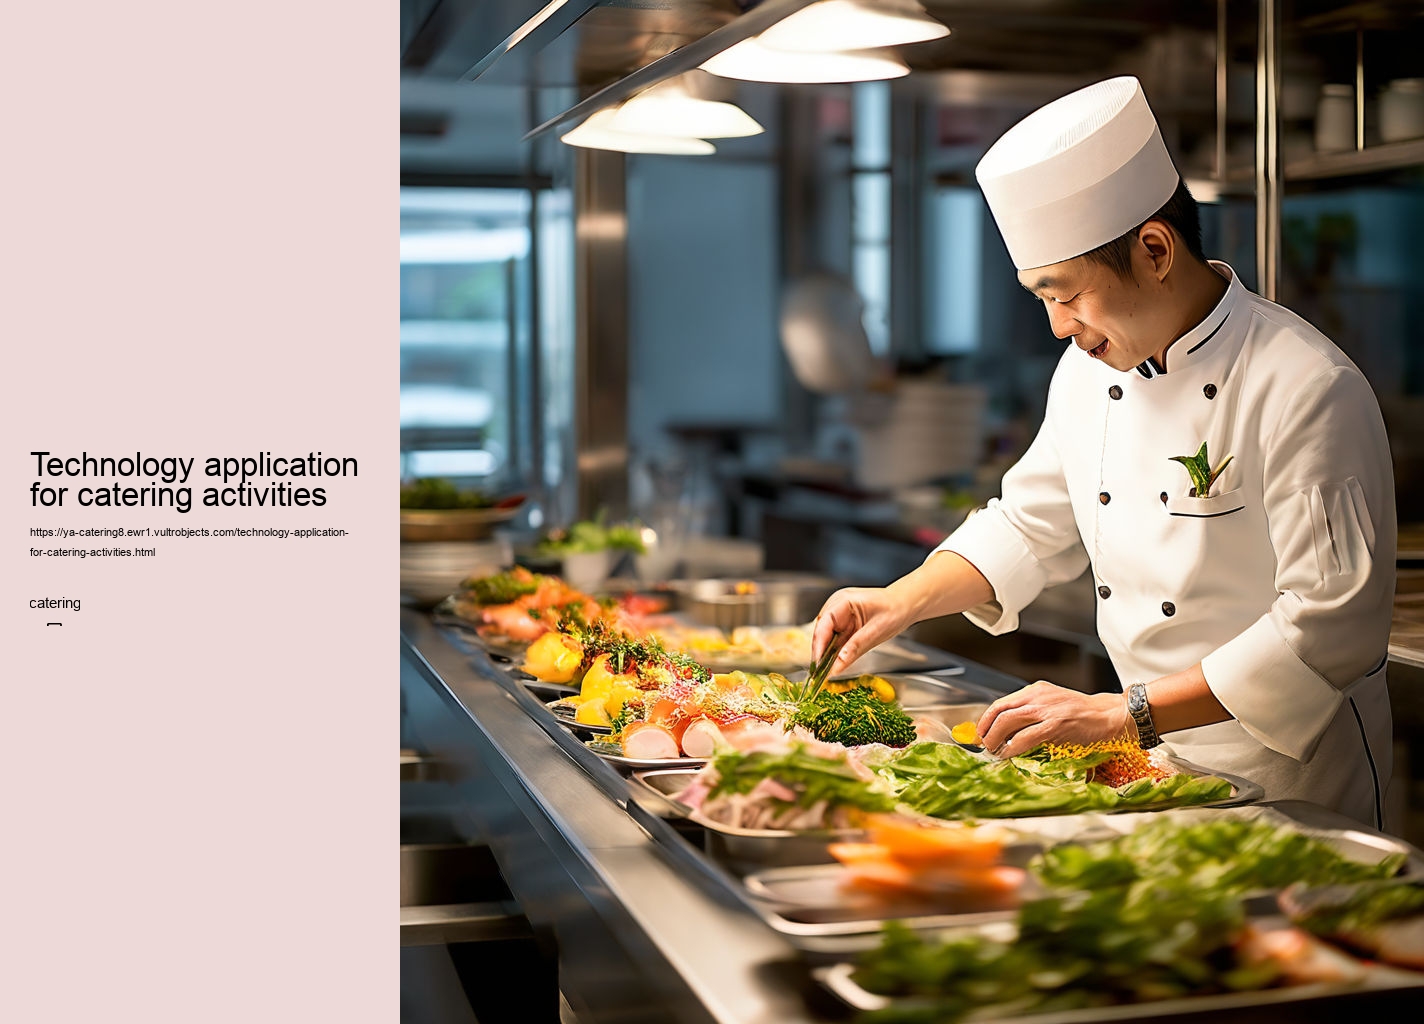 Technology application for catering activities